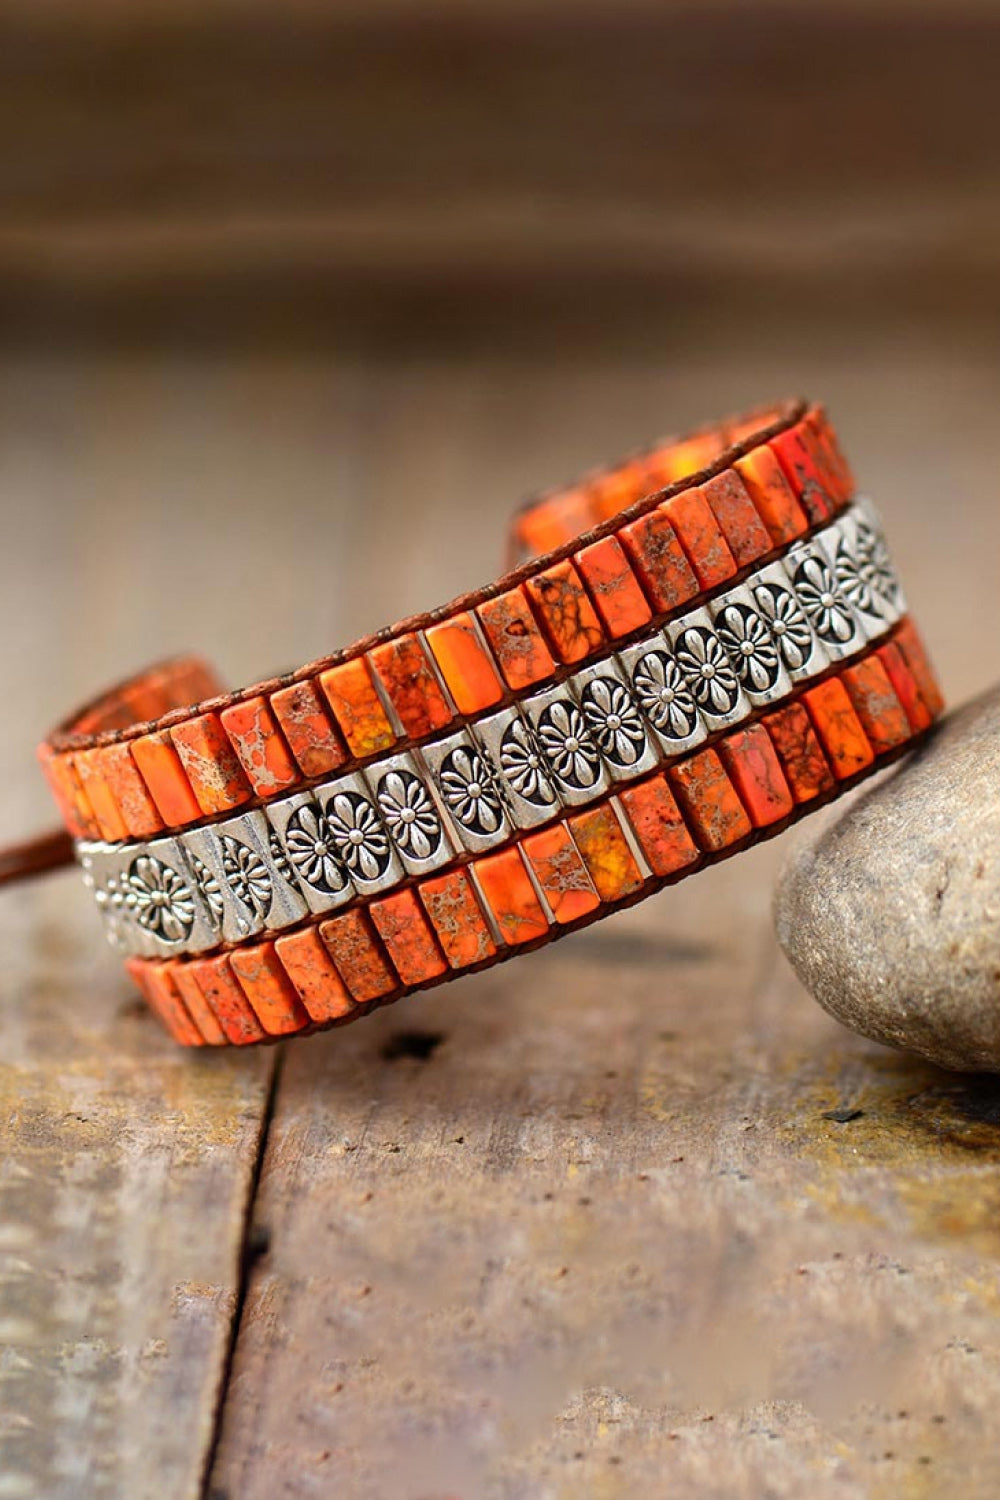 Handmade Triple Layer Natural Stone Bracelet Print on any thing USA/STOD clothes